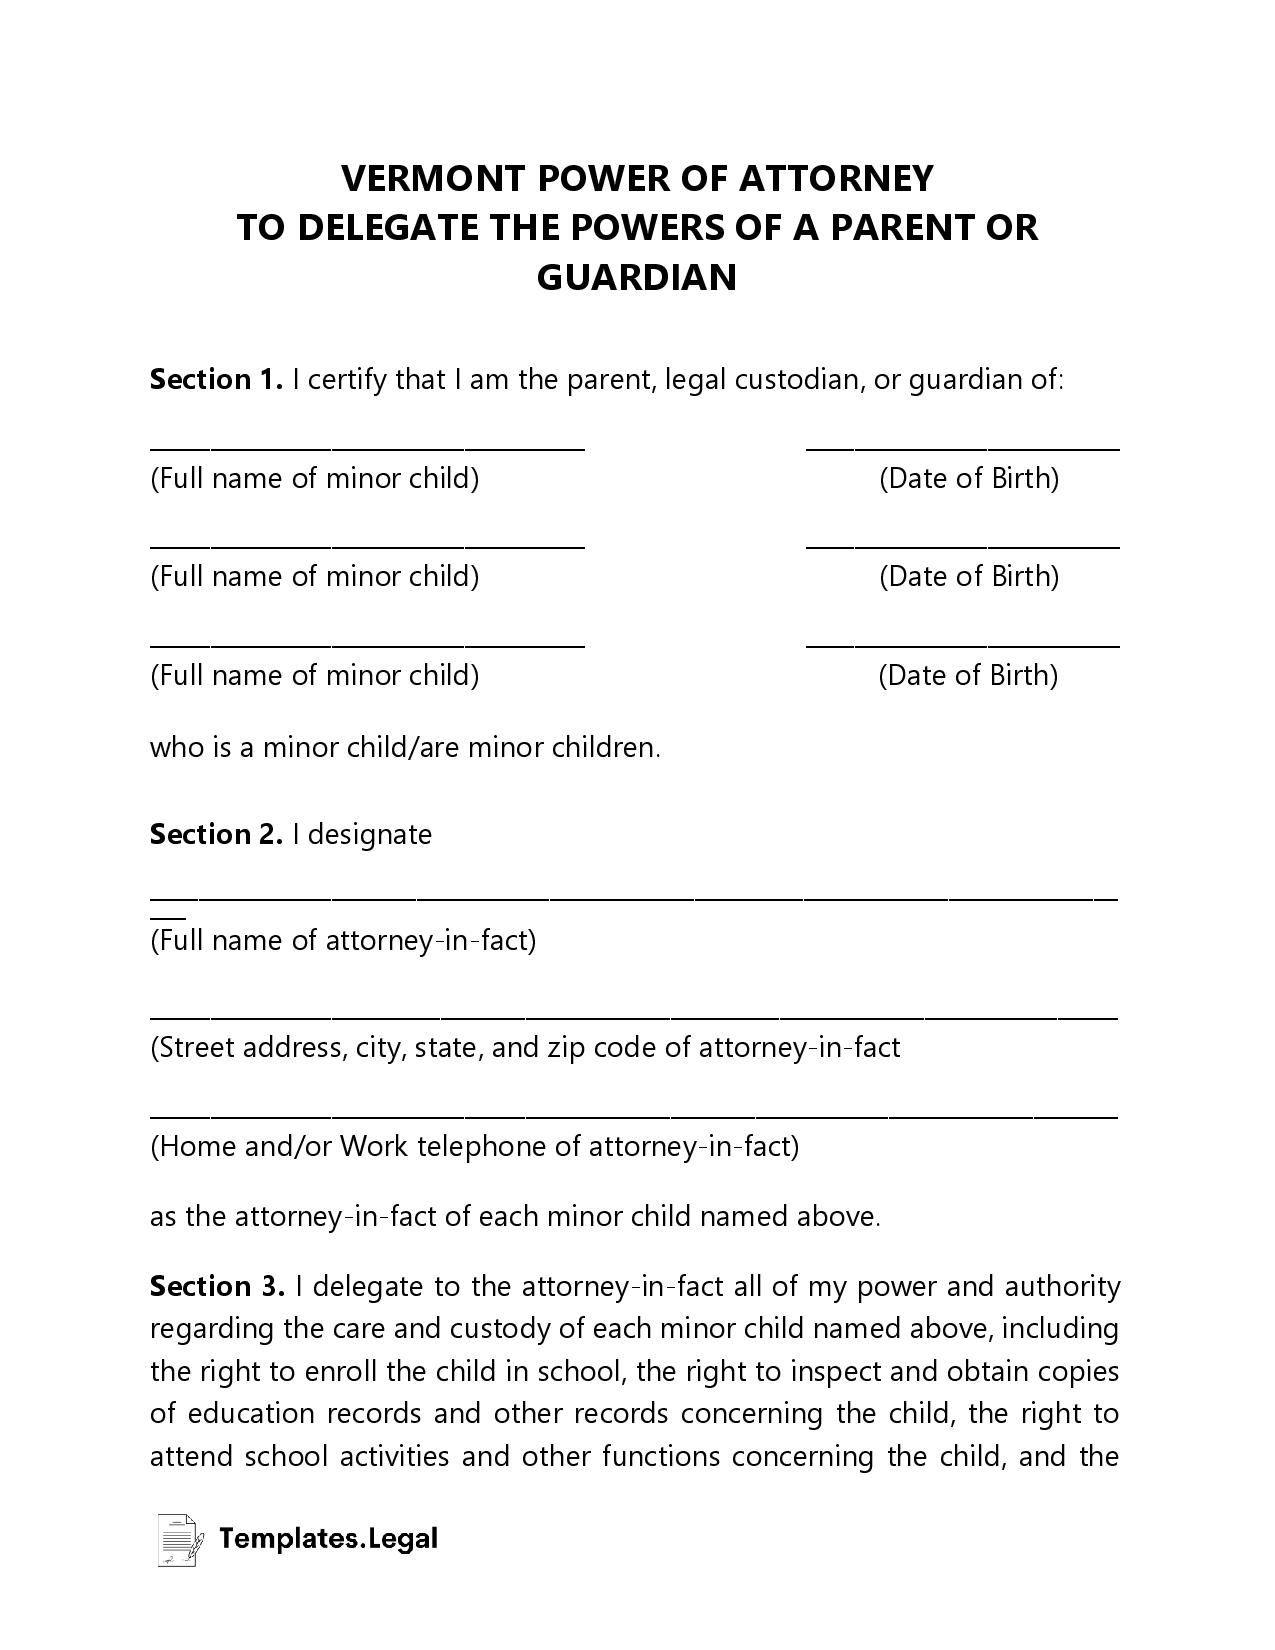 Vermont Minor (Child) Power of Attorney - Templates.Legal